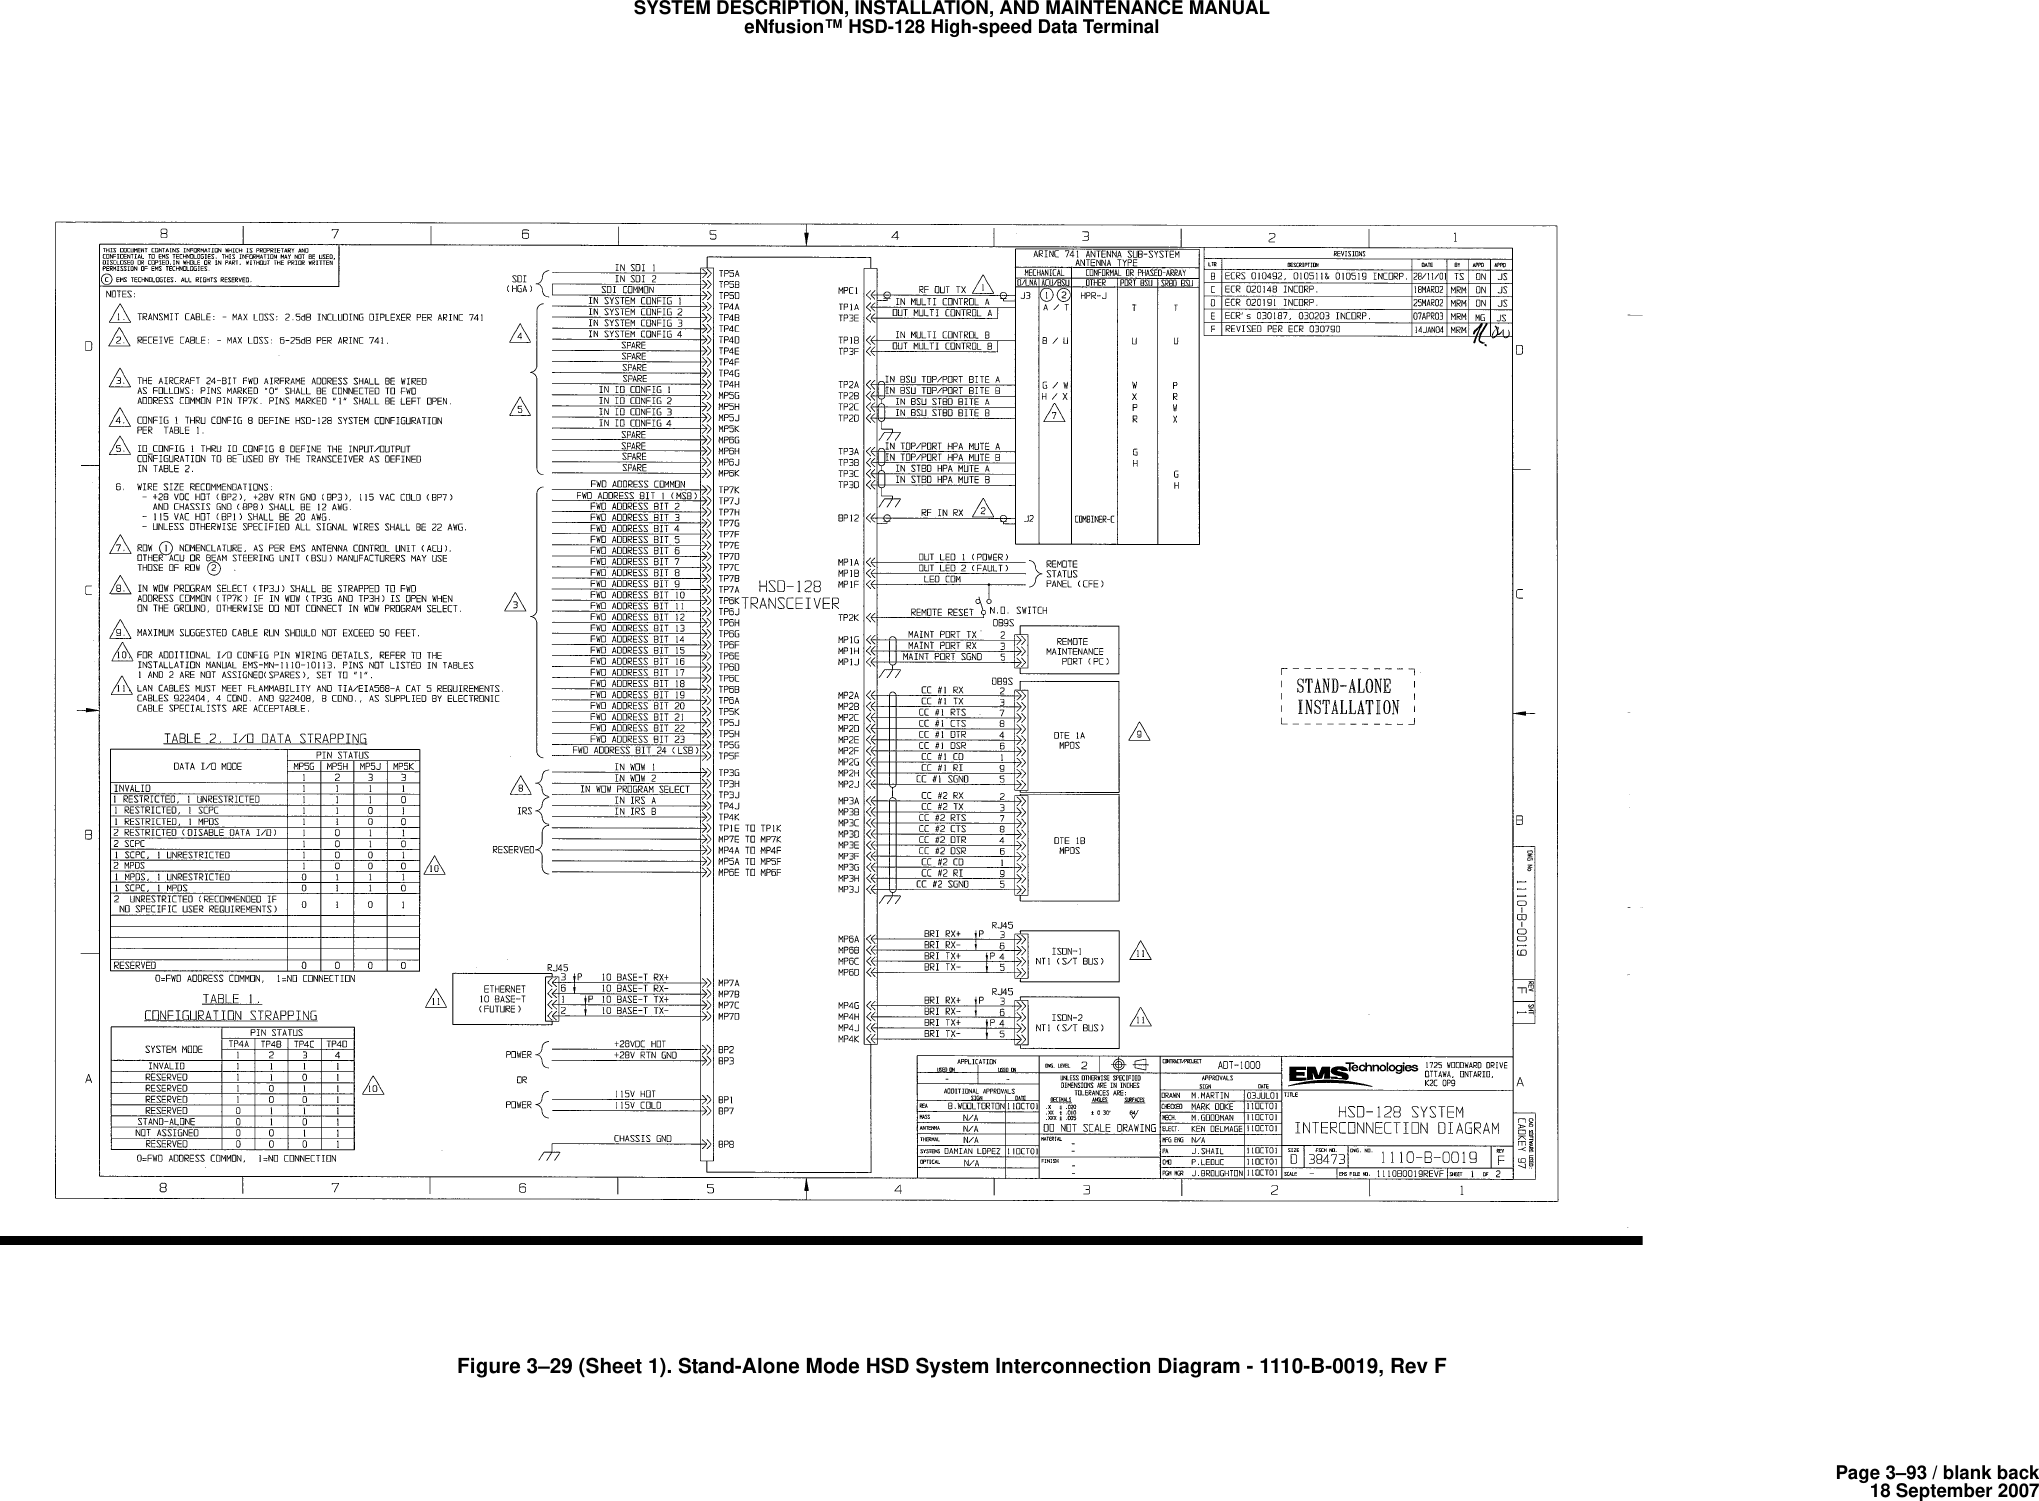 Page 3–93 / blank back18 September 2007SYSTEM DESCRIPTION, INSTALLATION, AND MAINTENANCE MANUALeNfusion™ HSD-128 High-speed Data TerminalFigure 3–29 (Sheet 1). Stand-Alone Mode HSD System Interconnection Diagram - 1110-B-0019, Rev F